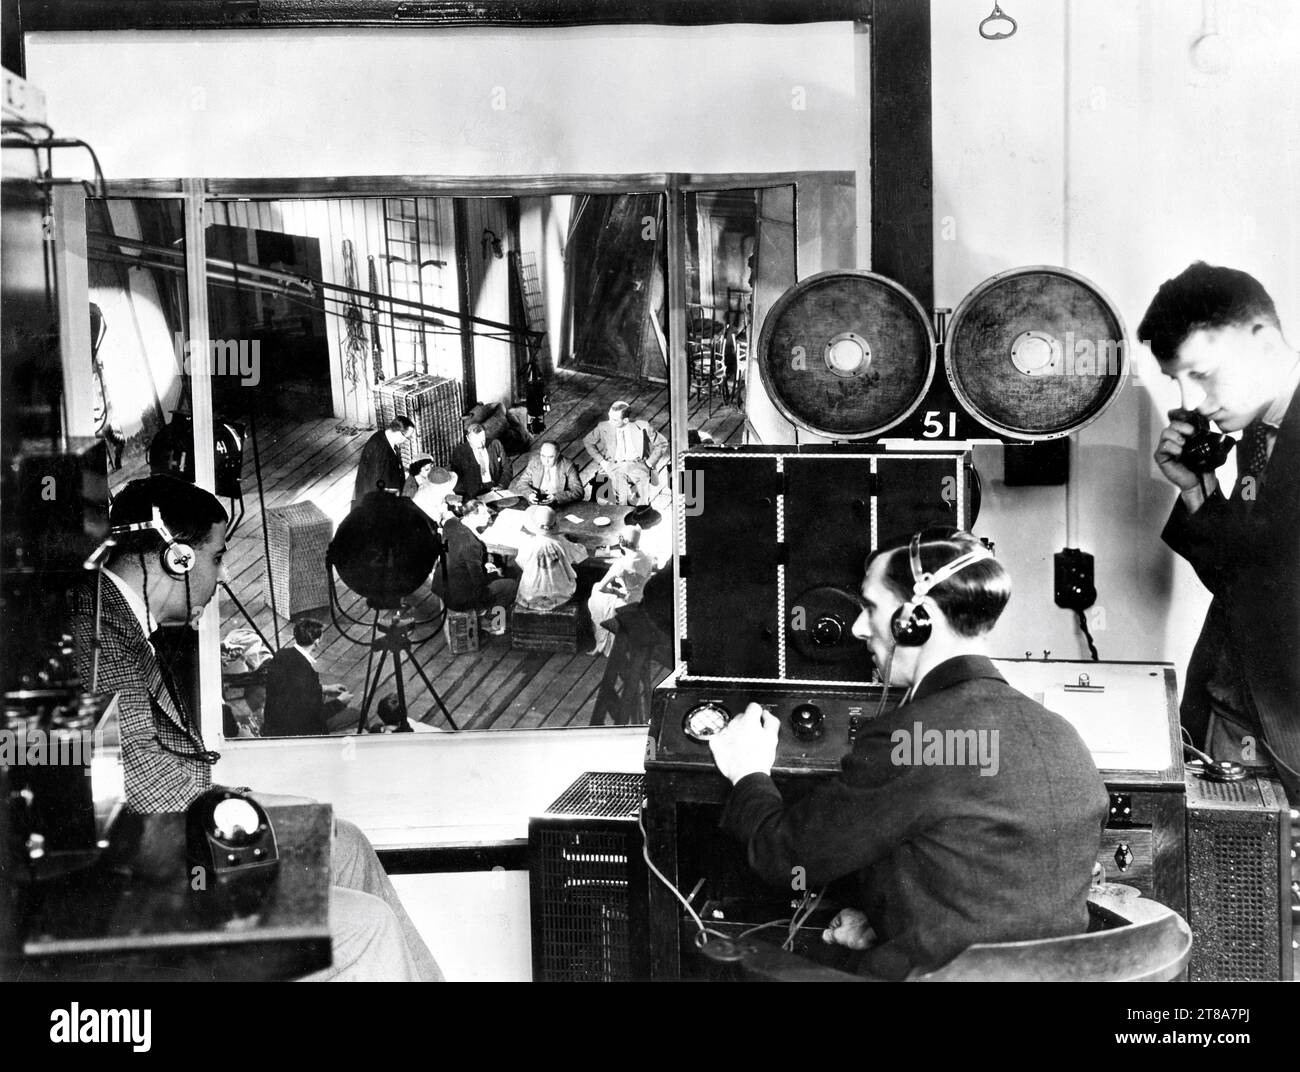 Sound Engineers in glass-panelled booth operating the new British Acoustic sound recording apparatus with below Director VICTOR SAVILLE directing a scene with JESSIE MATTHEWS EDMUND GWENN and JOHN GIELGUD during filming of THE GOOD COMPANIONS 1933 director VICTOR SAVILLE novel J.B. Priestley Gaumont British Film Corporation / Welsh-Pearson publicity for British Acoustic Films Ltd. Stock Photo